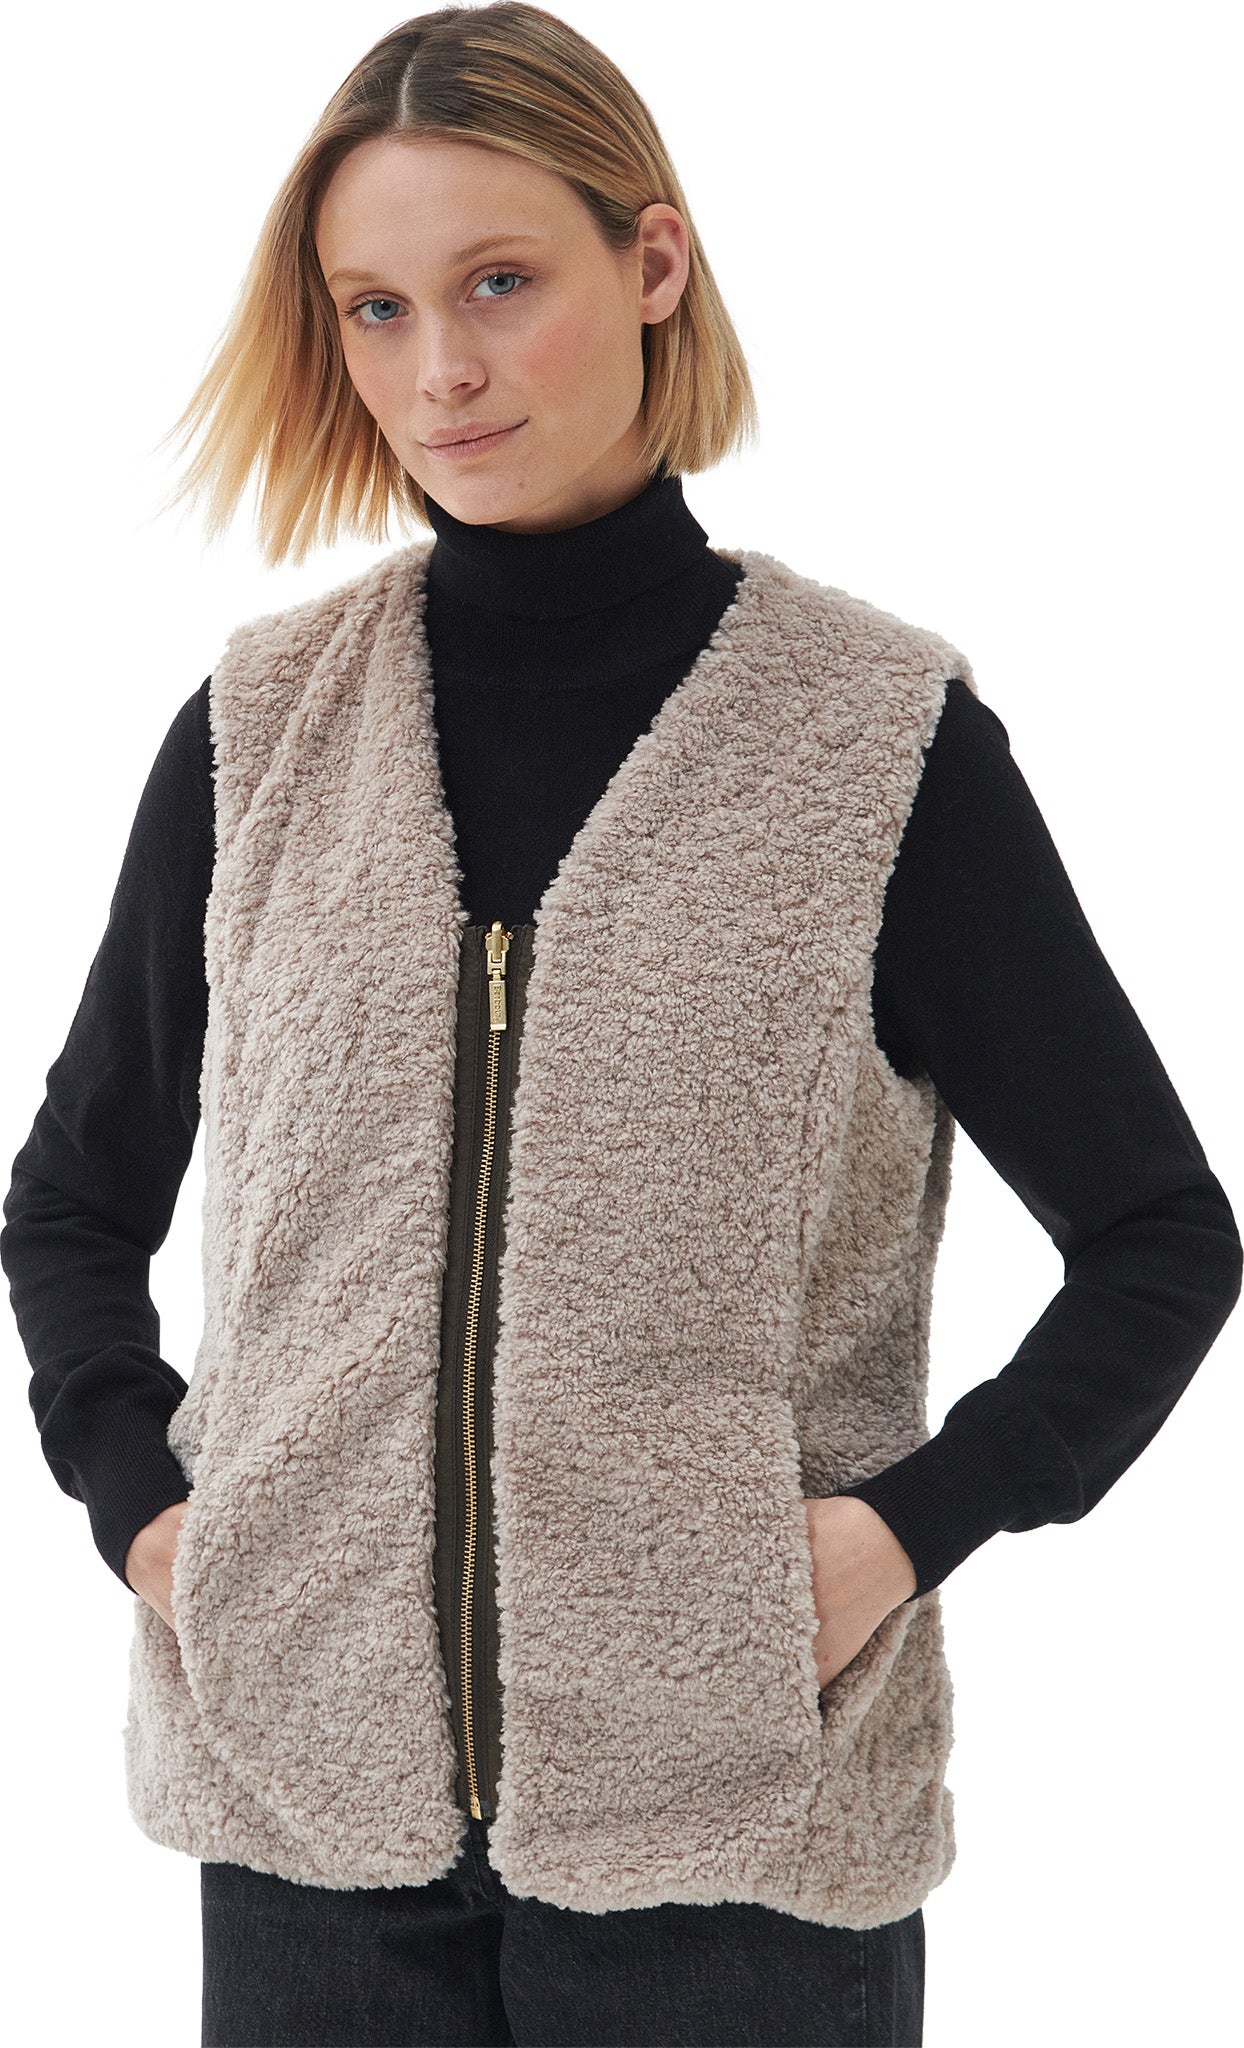 The Boucle Knit Sweater Vest in Khaki Green – Frank And Oak Canada